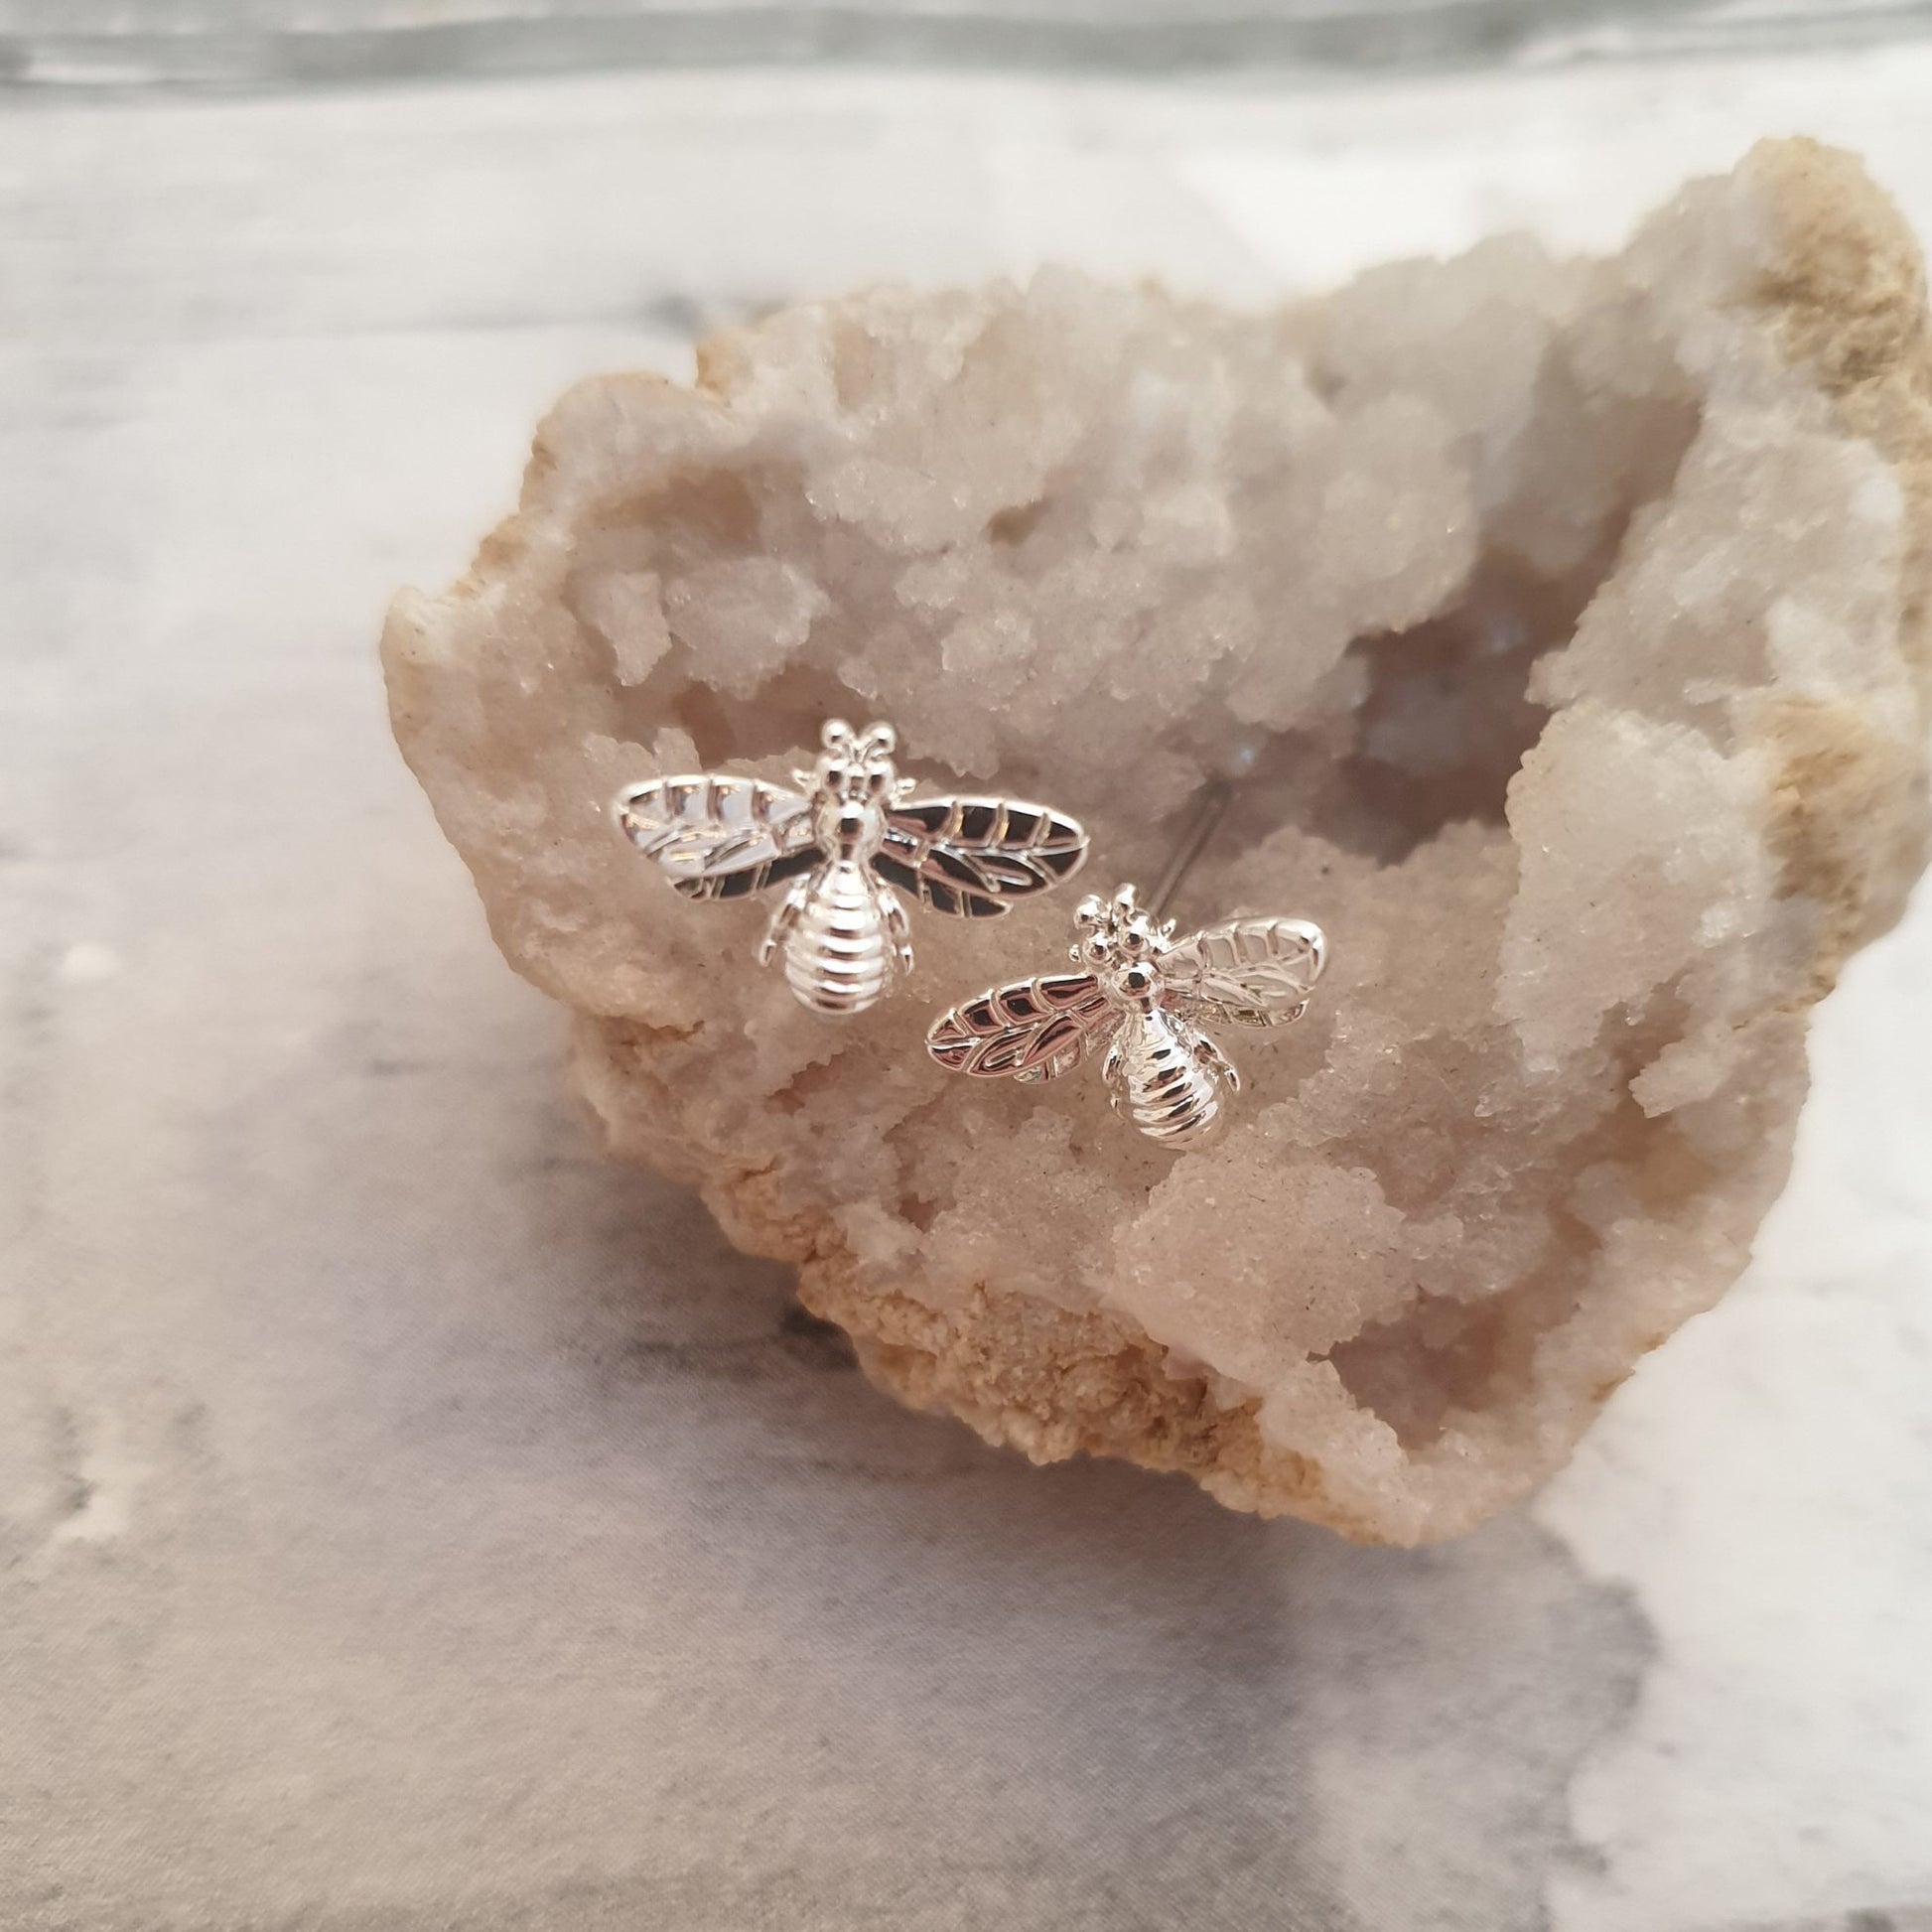 Photo of a pair of silver plated Honey Bee stud earrings